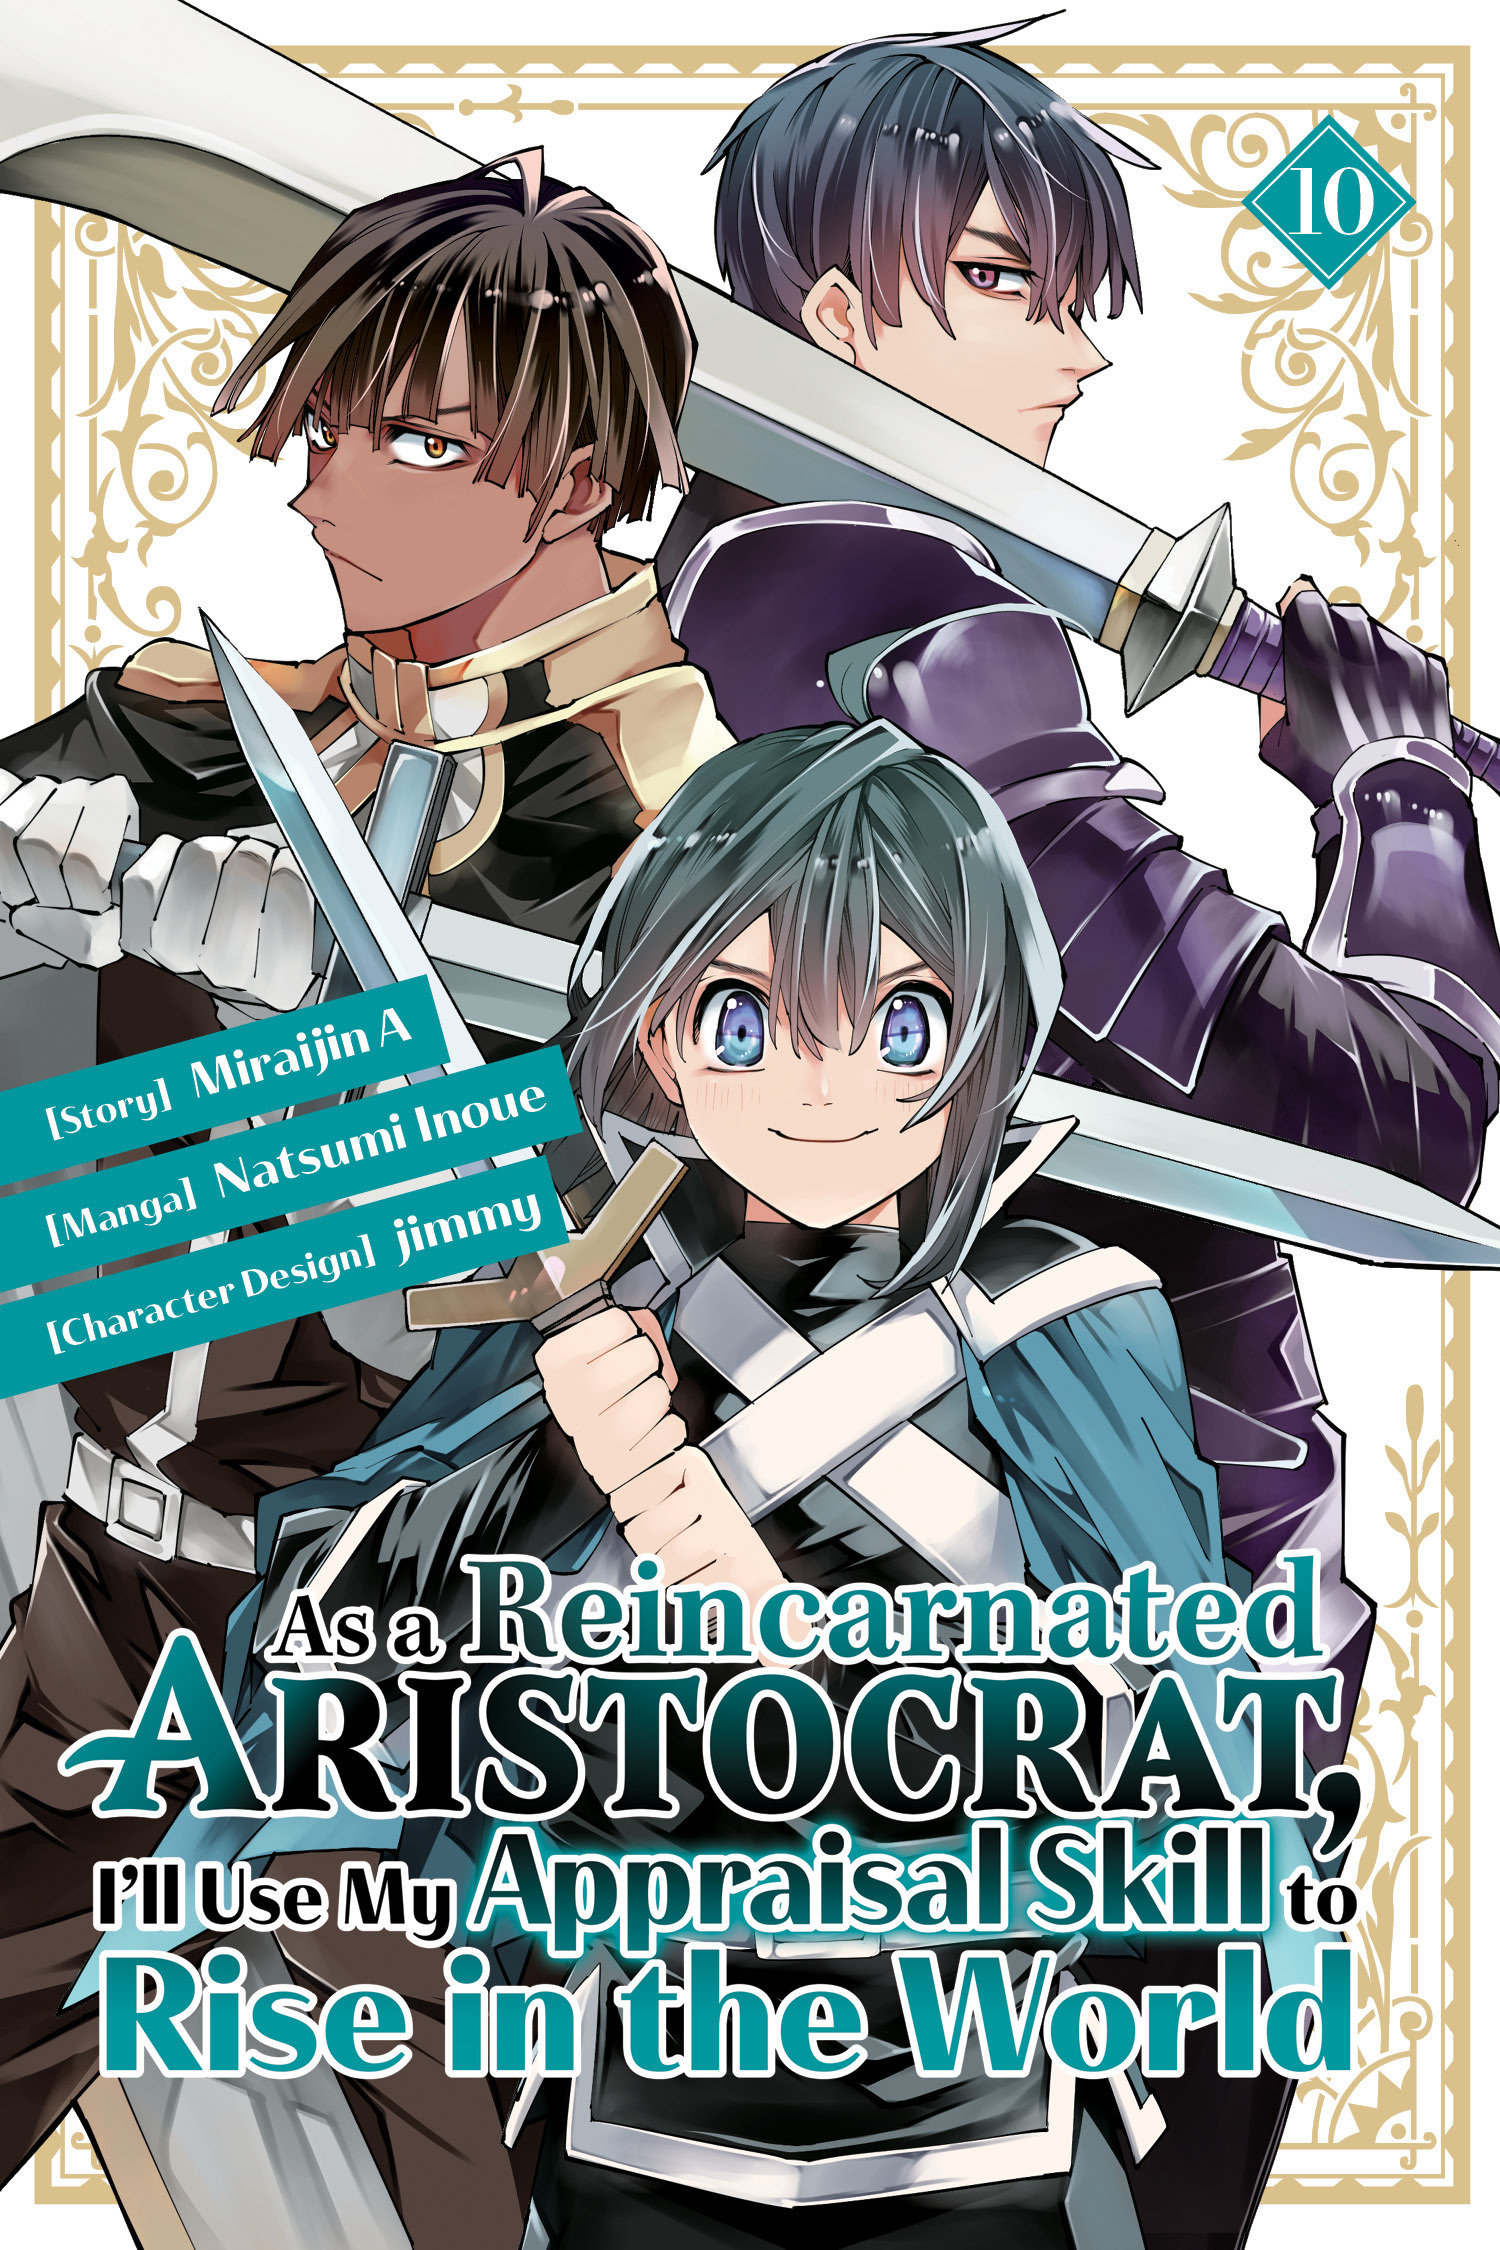 As a Reincarnated Aristocrat, I'll Use My Appraisal Skill to Rise in the World Manga Volume 10